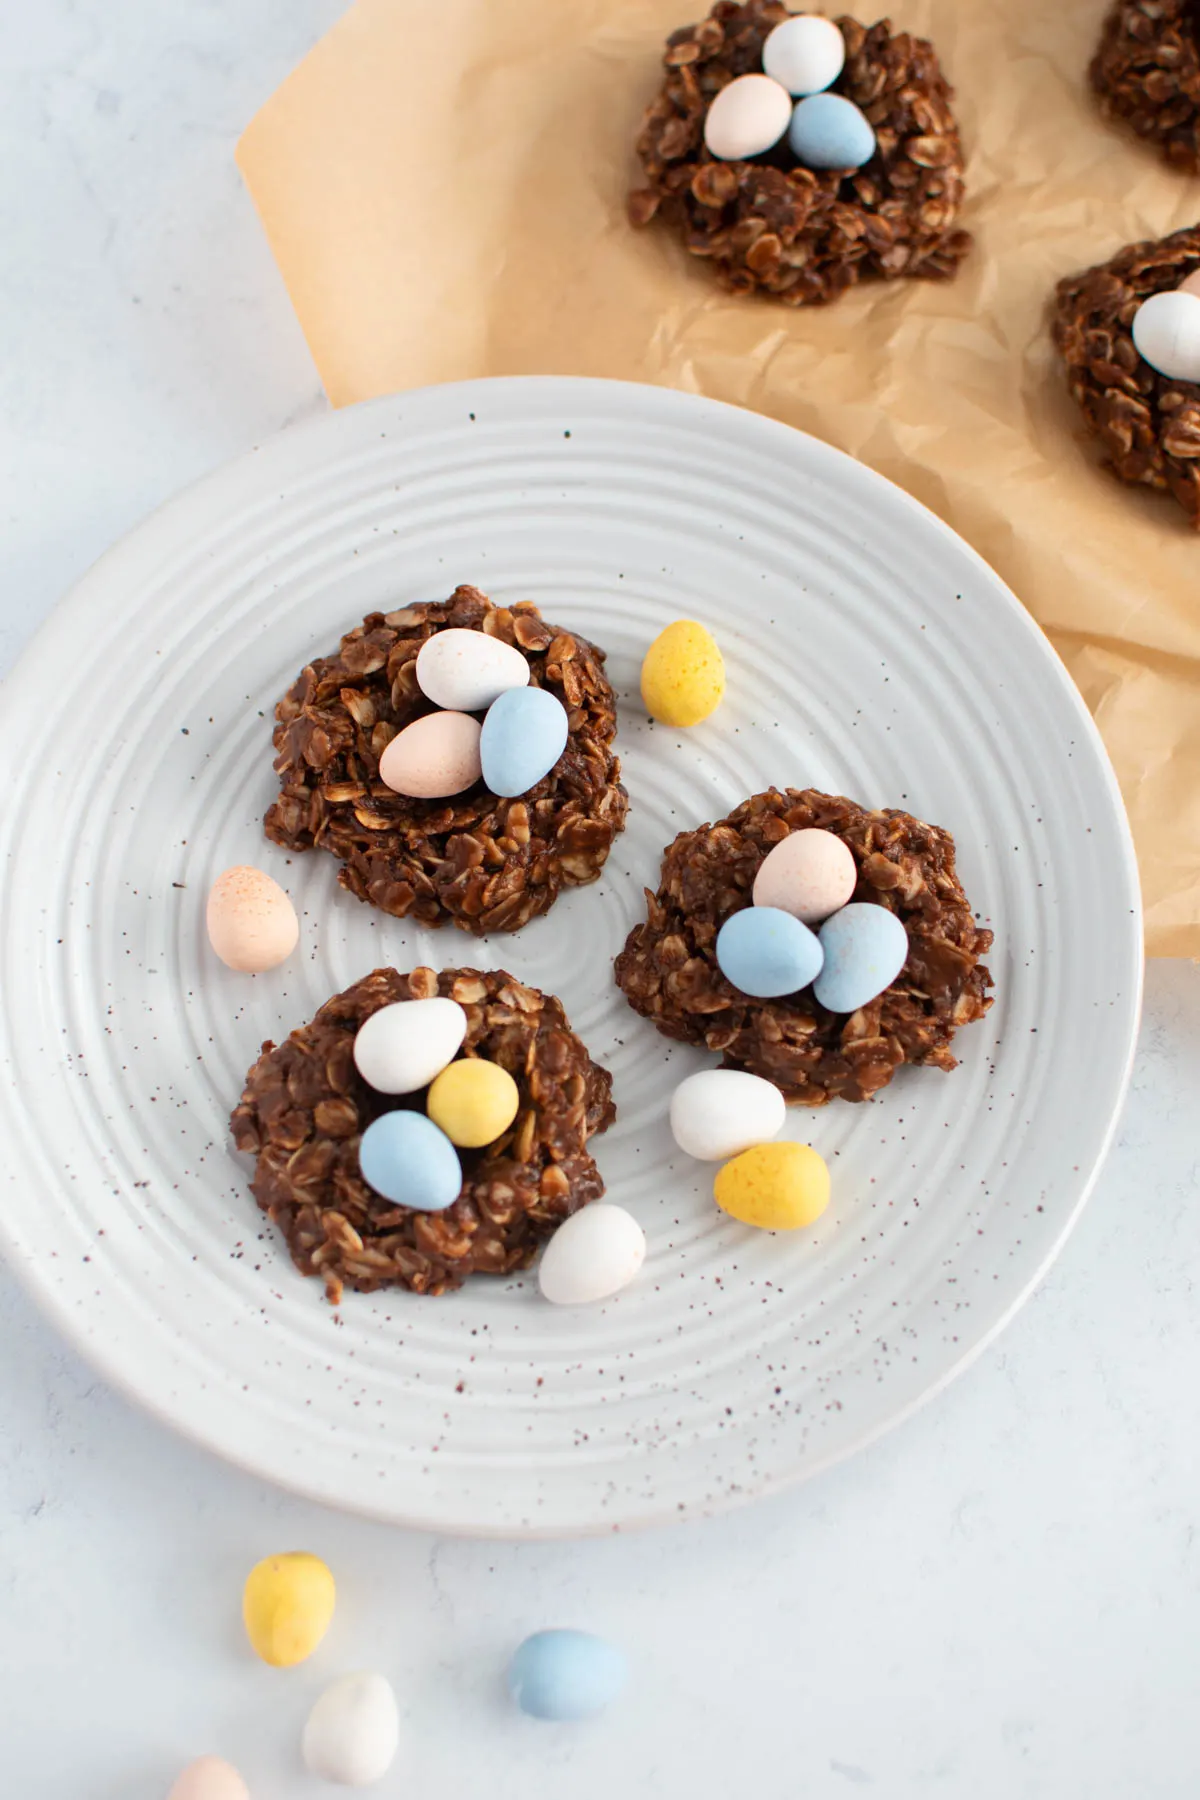 Three Easter nest cookies on speckled plate with loose pastel coated chocolate eggs sprinkled around.